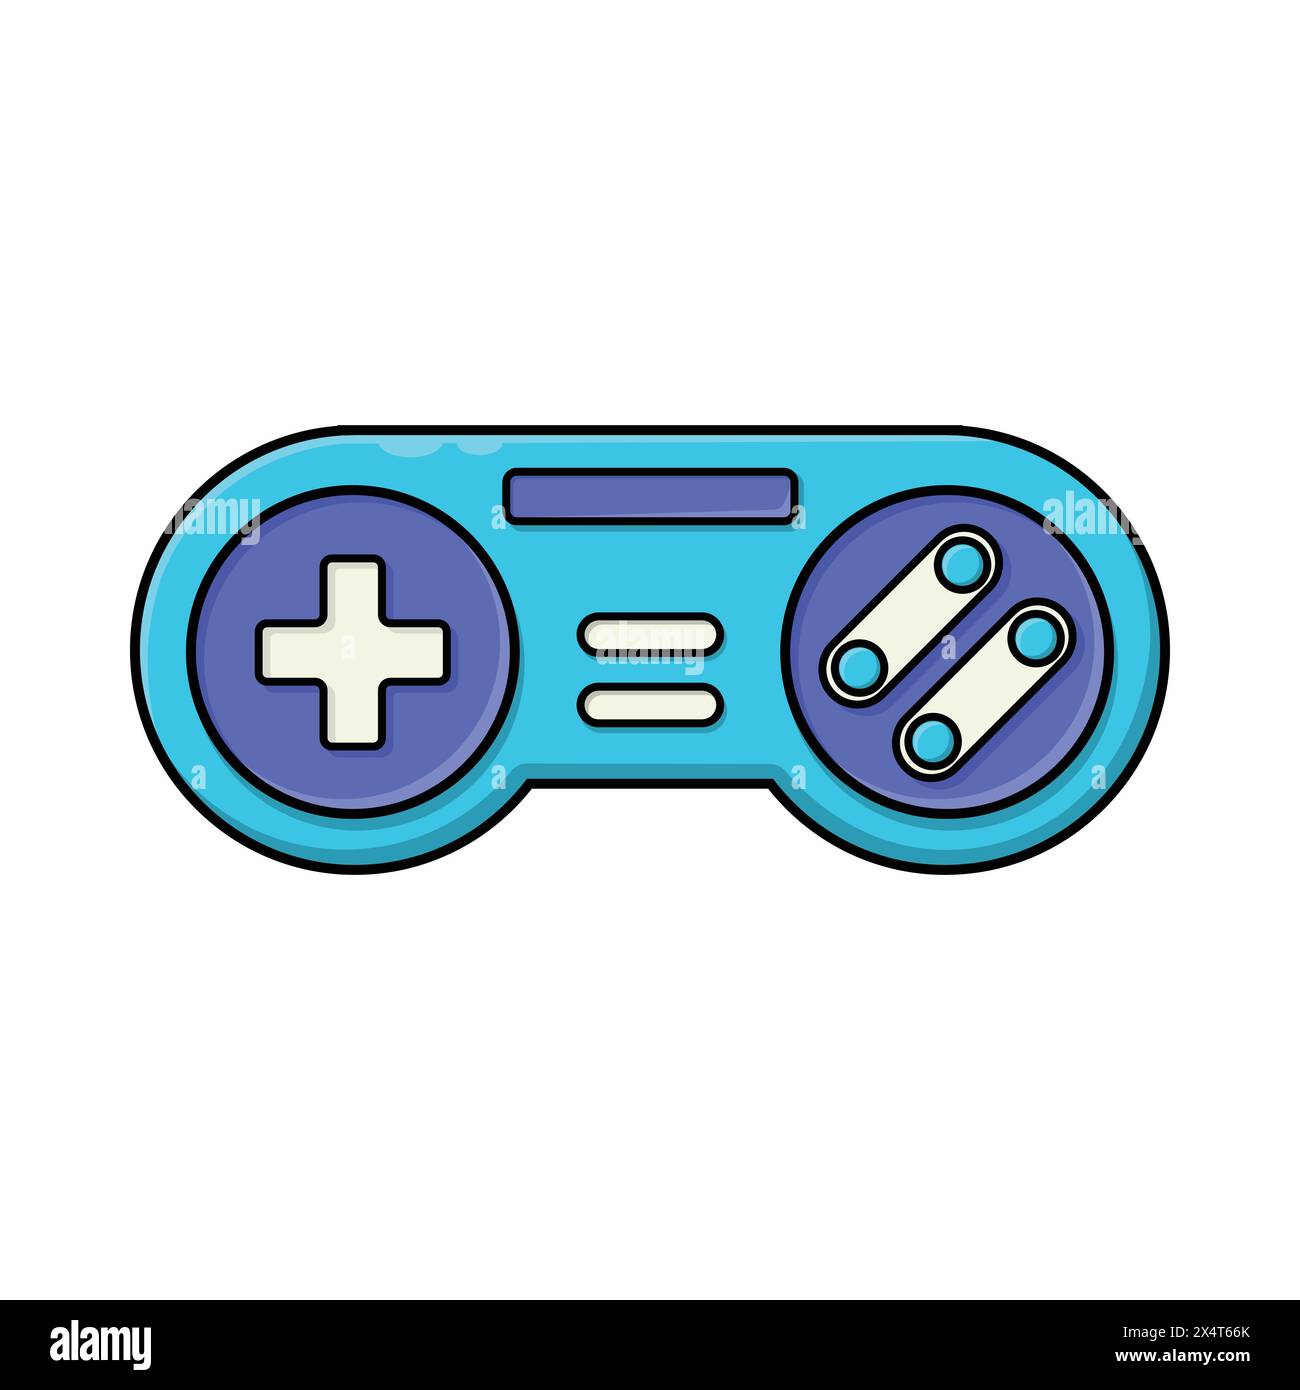 Retro style gamepad icon. vintage illustration of gamepad vector icon for web technology concept and design element Stock Vector